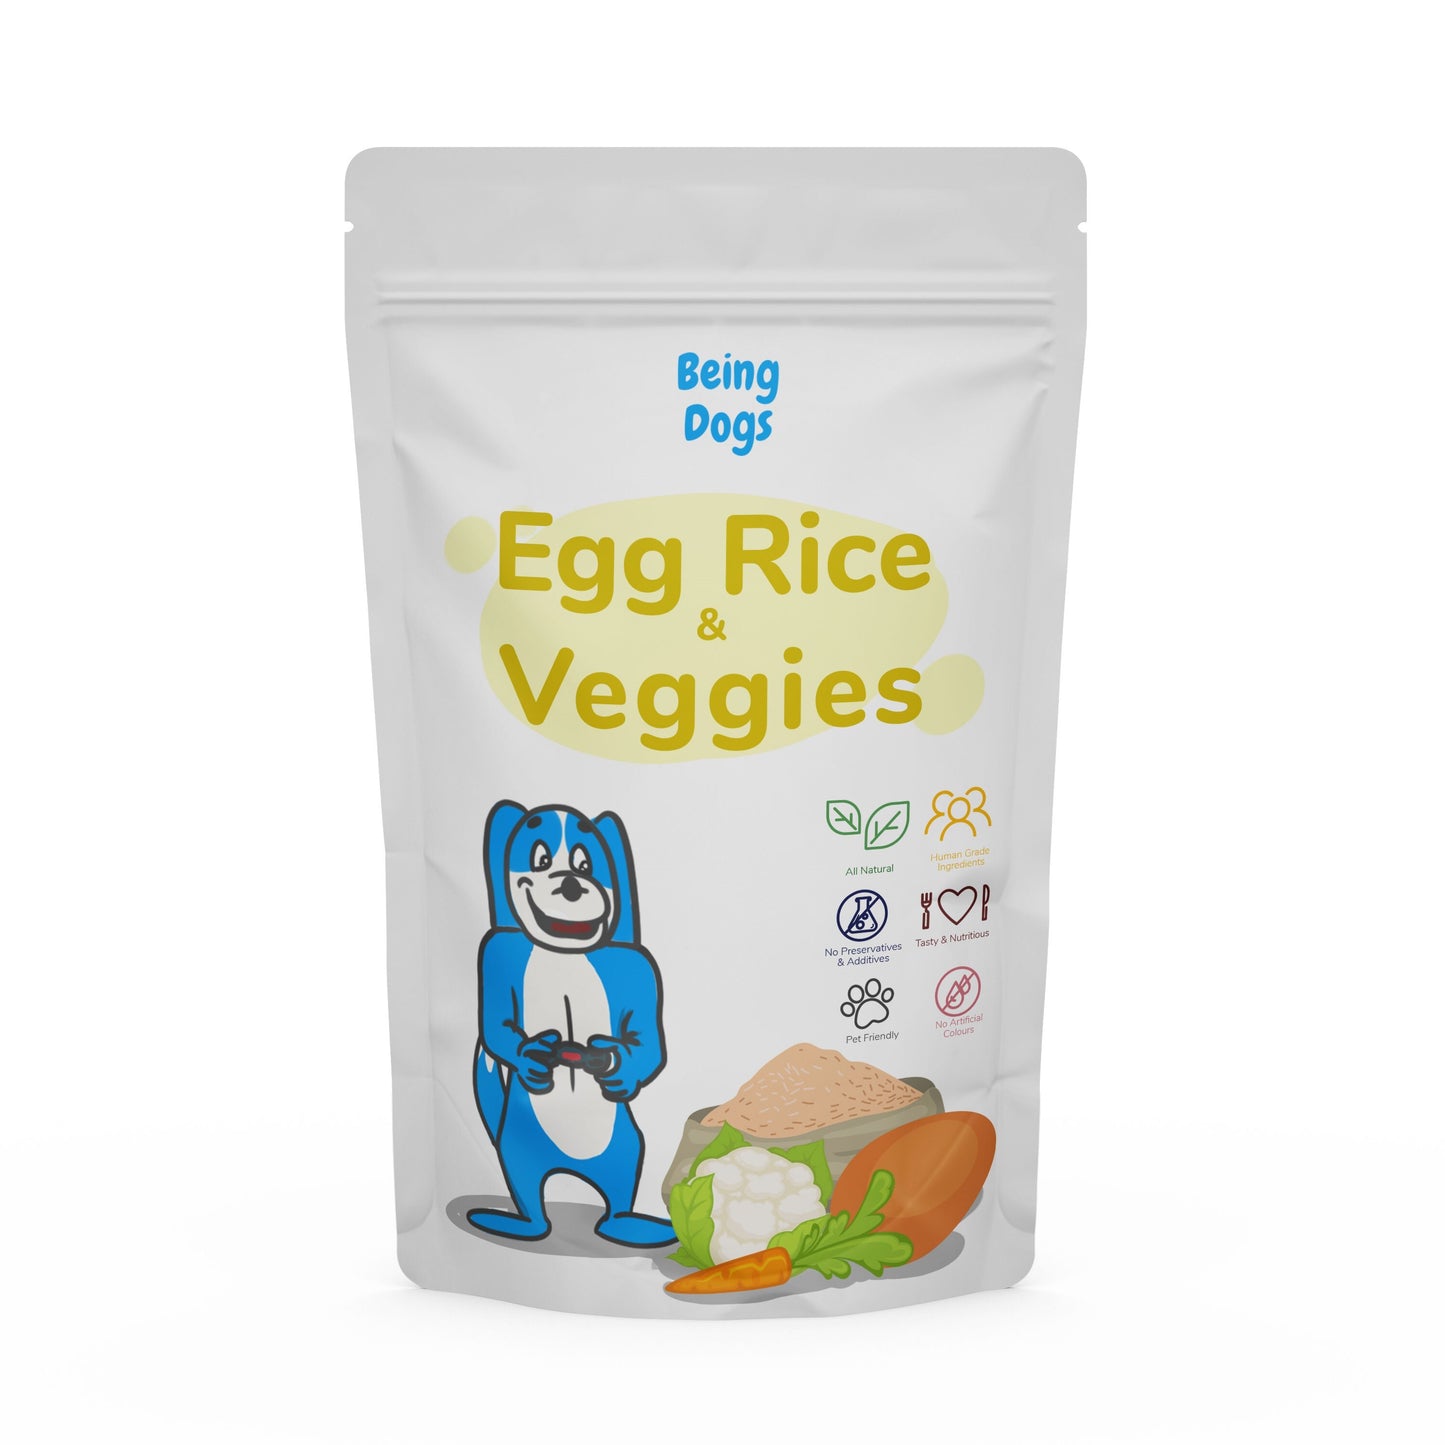 Egg Rice & Veggies Meal For Dogs (Single Packet), Customised, Made Fresh Daily, Zero Preservatives, High In Protein